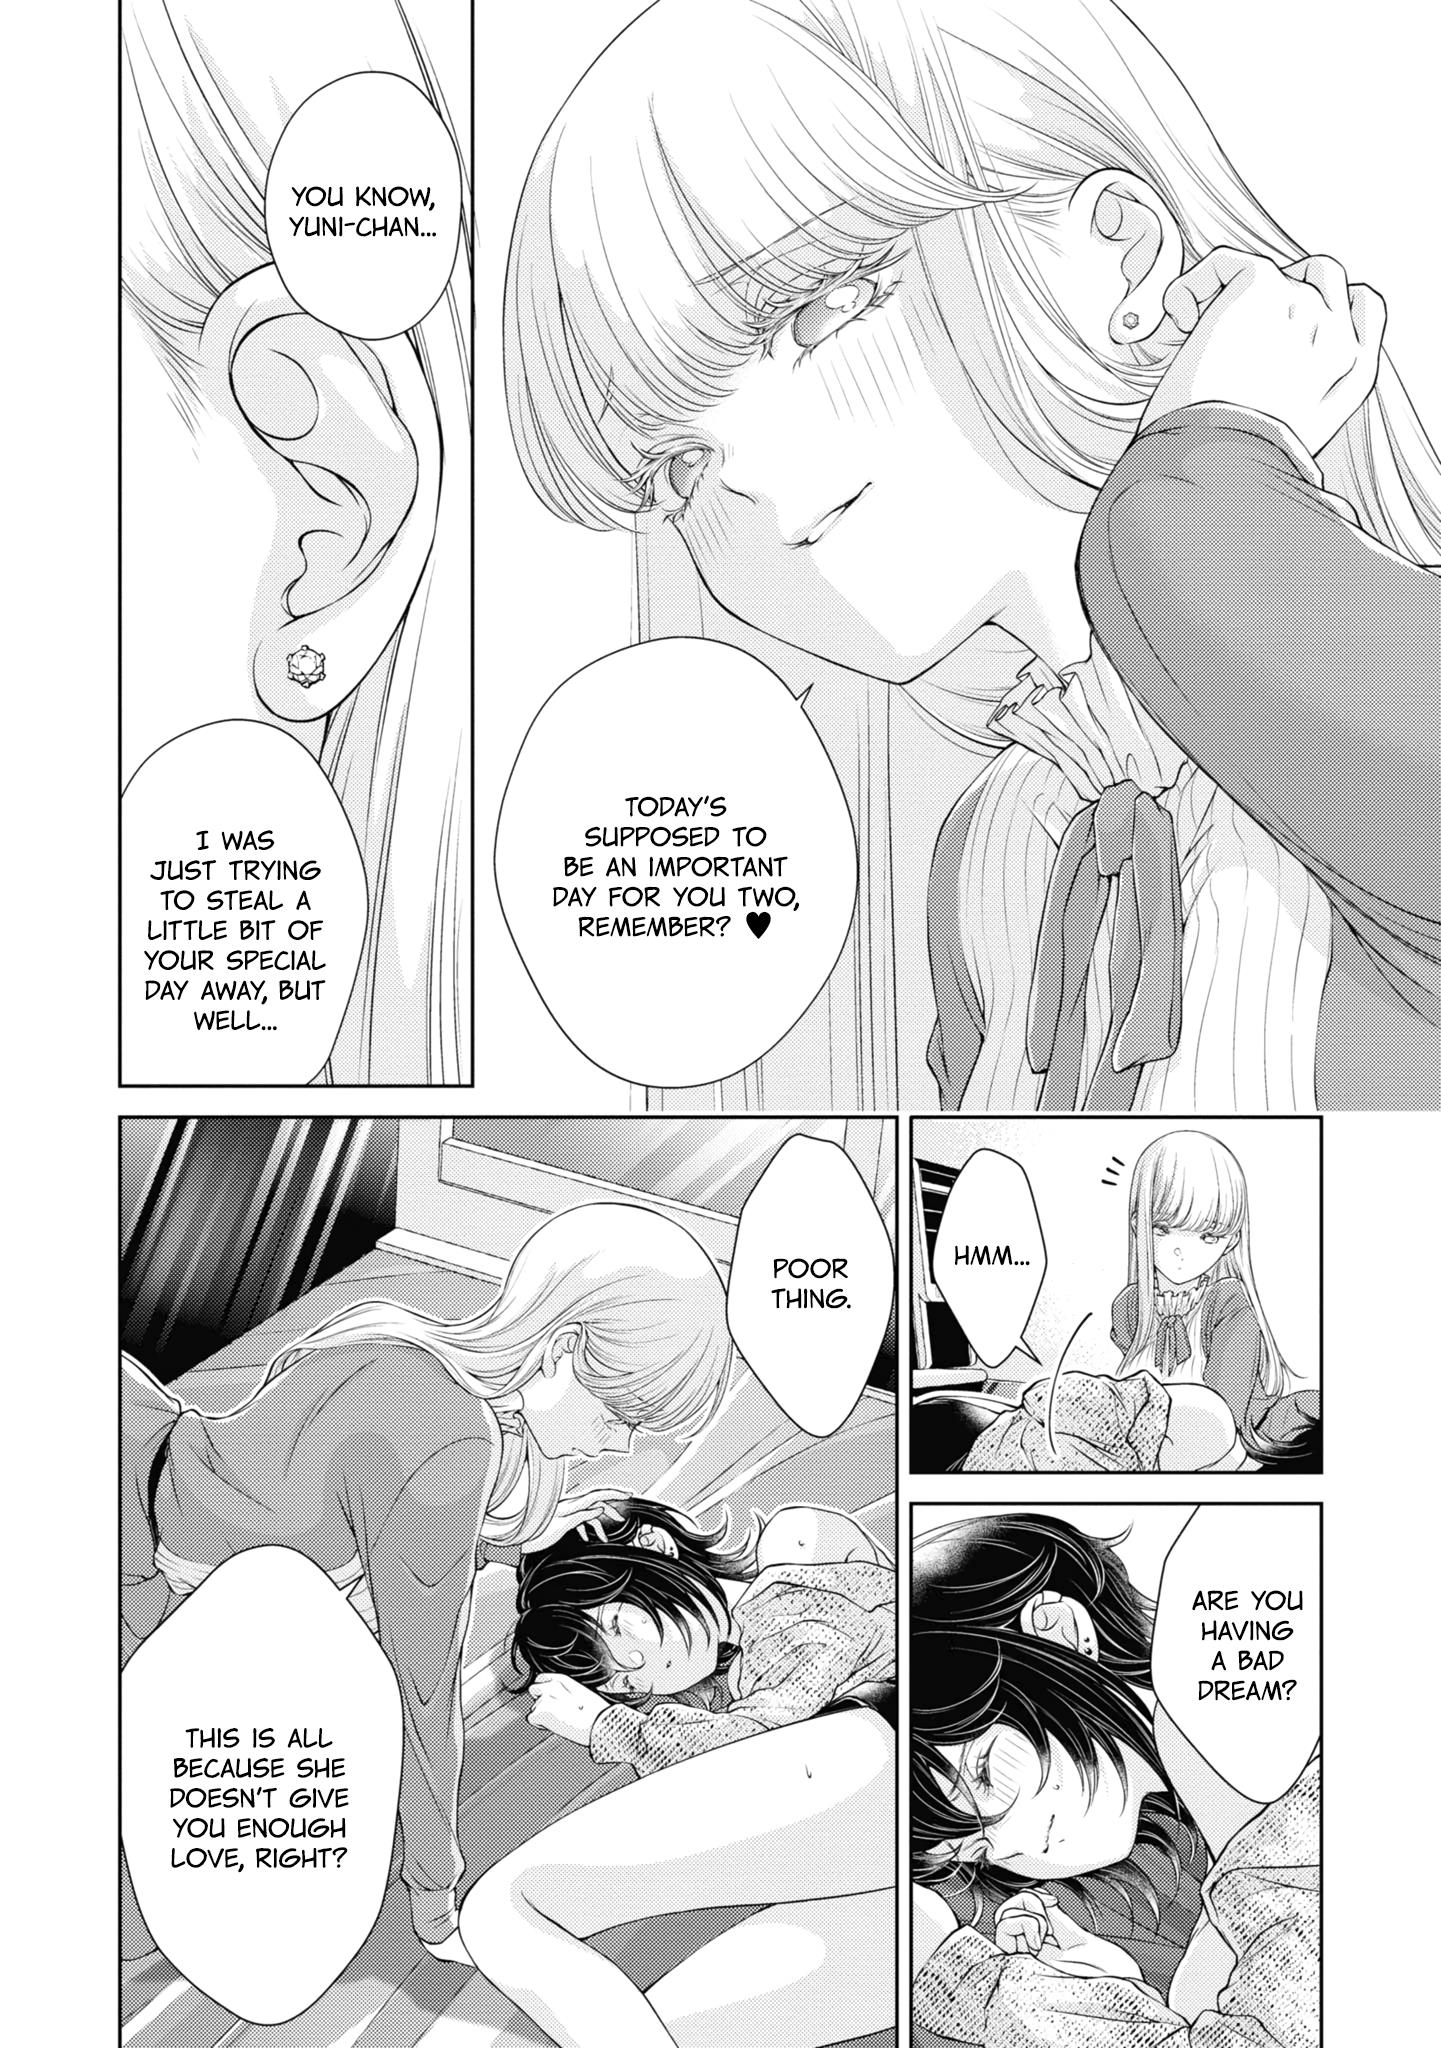 My Girlfriend’S Not Here Today Vol.1 Chapter 5.5: Afterword And Extra Pages Volume 1 - Picture 3